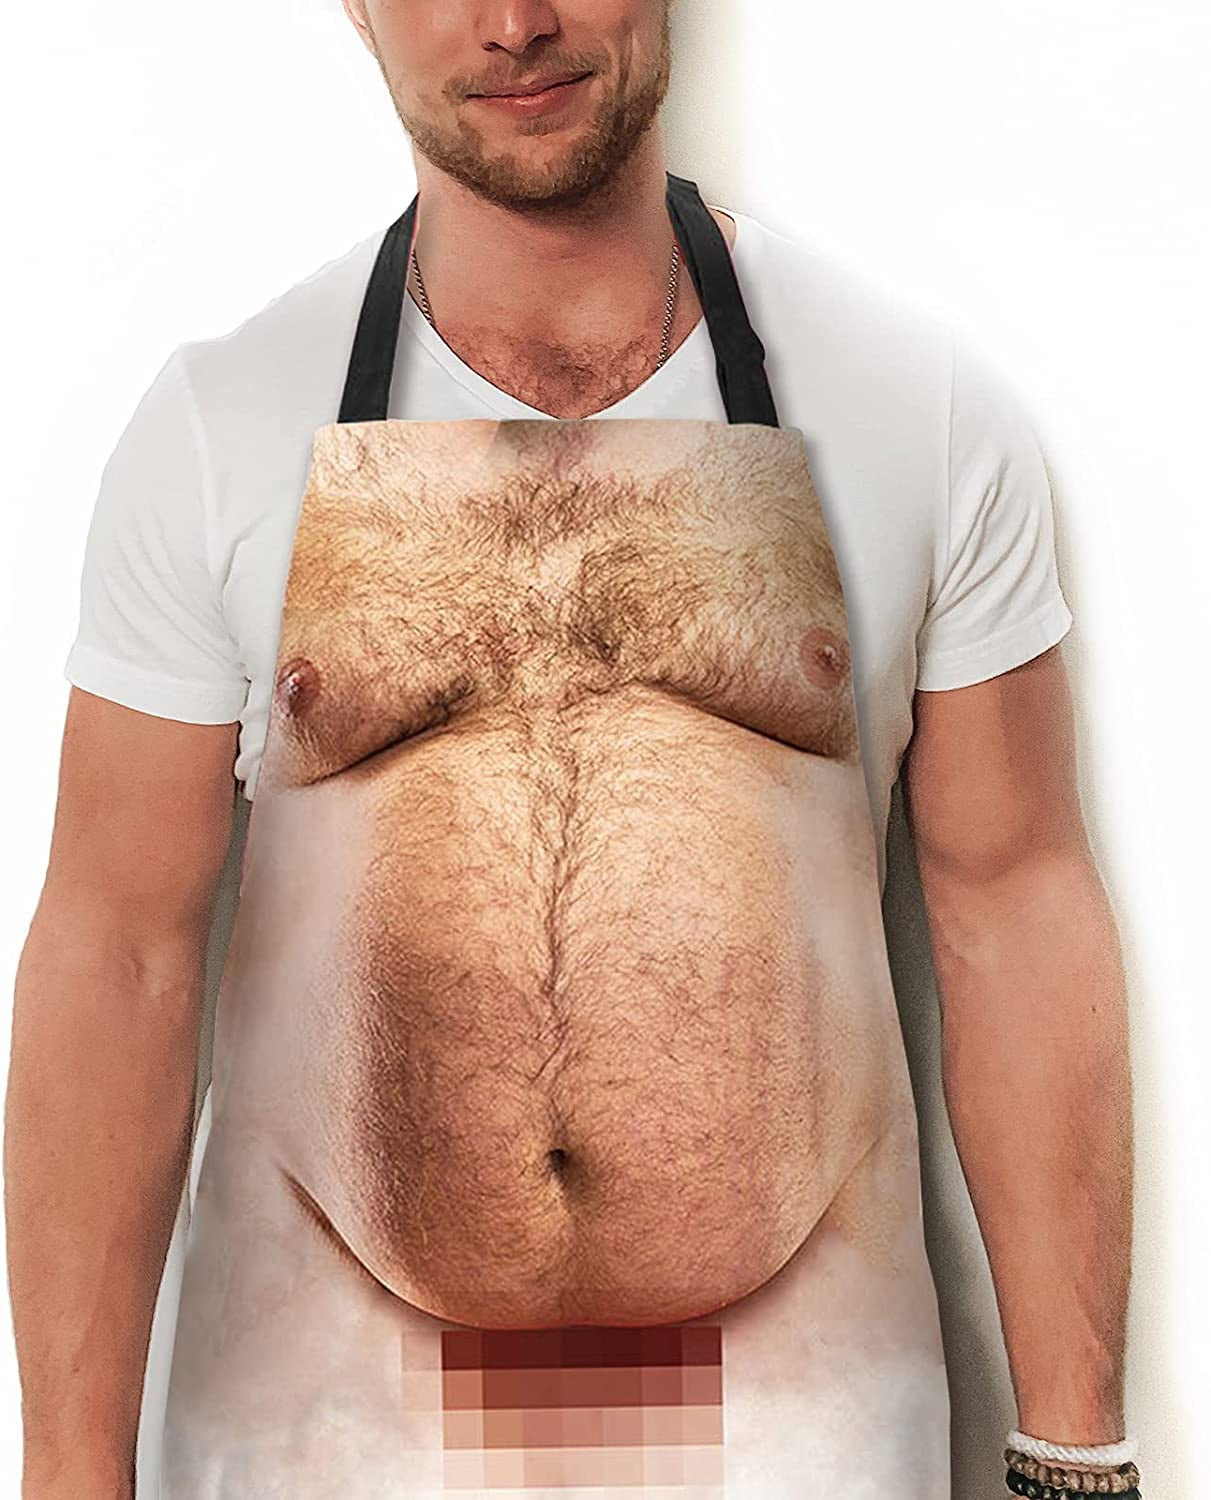 A AIFAMY Funny Men Cooking Grilling Aprons Belly BBQ Funny Gag Gifts for  Christmas, White Elephant Gift Exchange